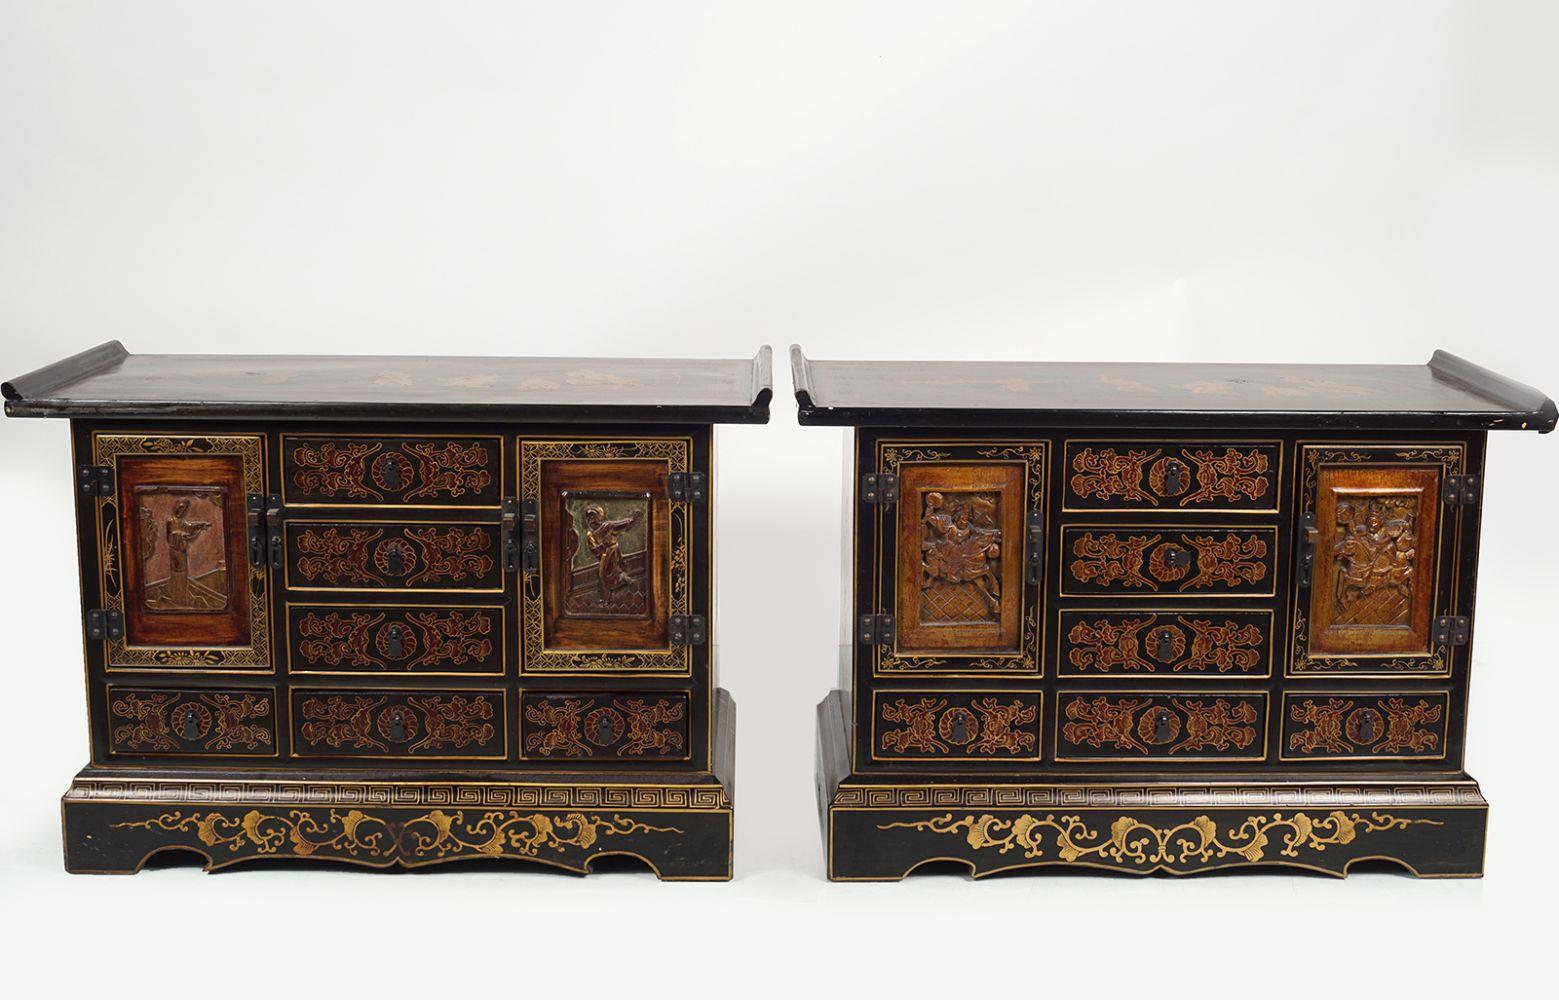 PAIR 19TH-CENTURY CHINESE LACQUERED CHESTS